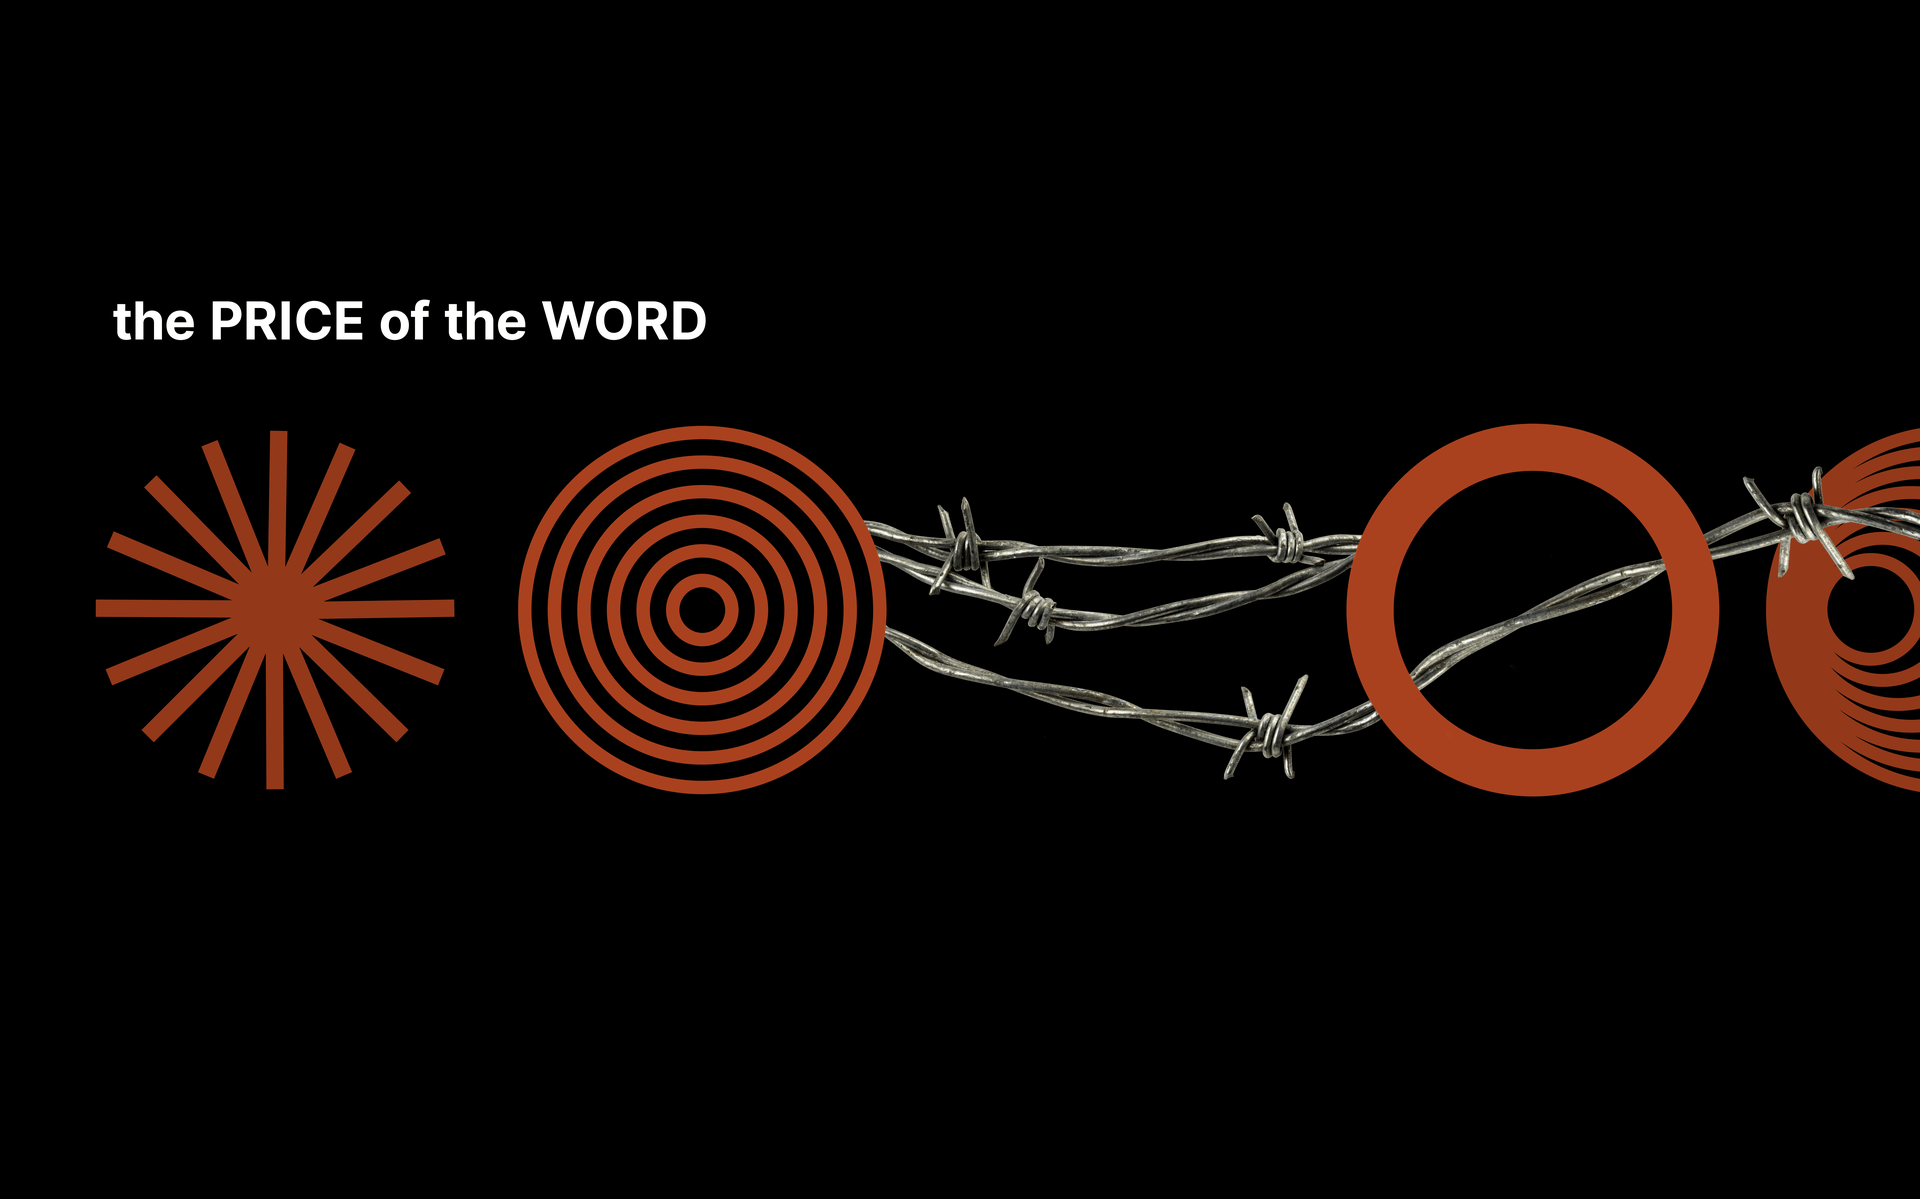 The Price of the Word